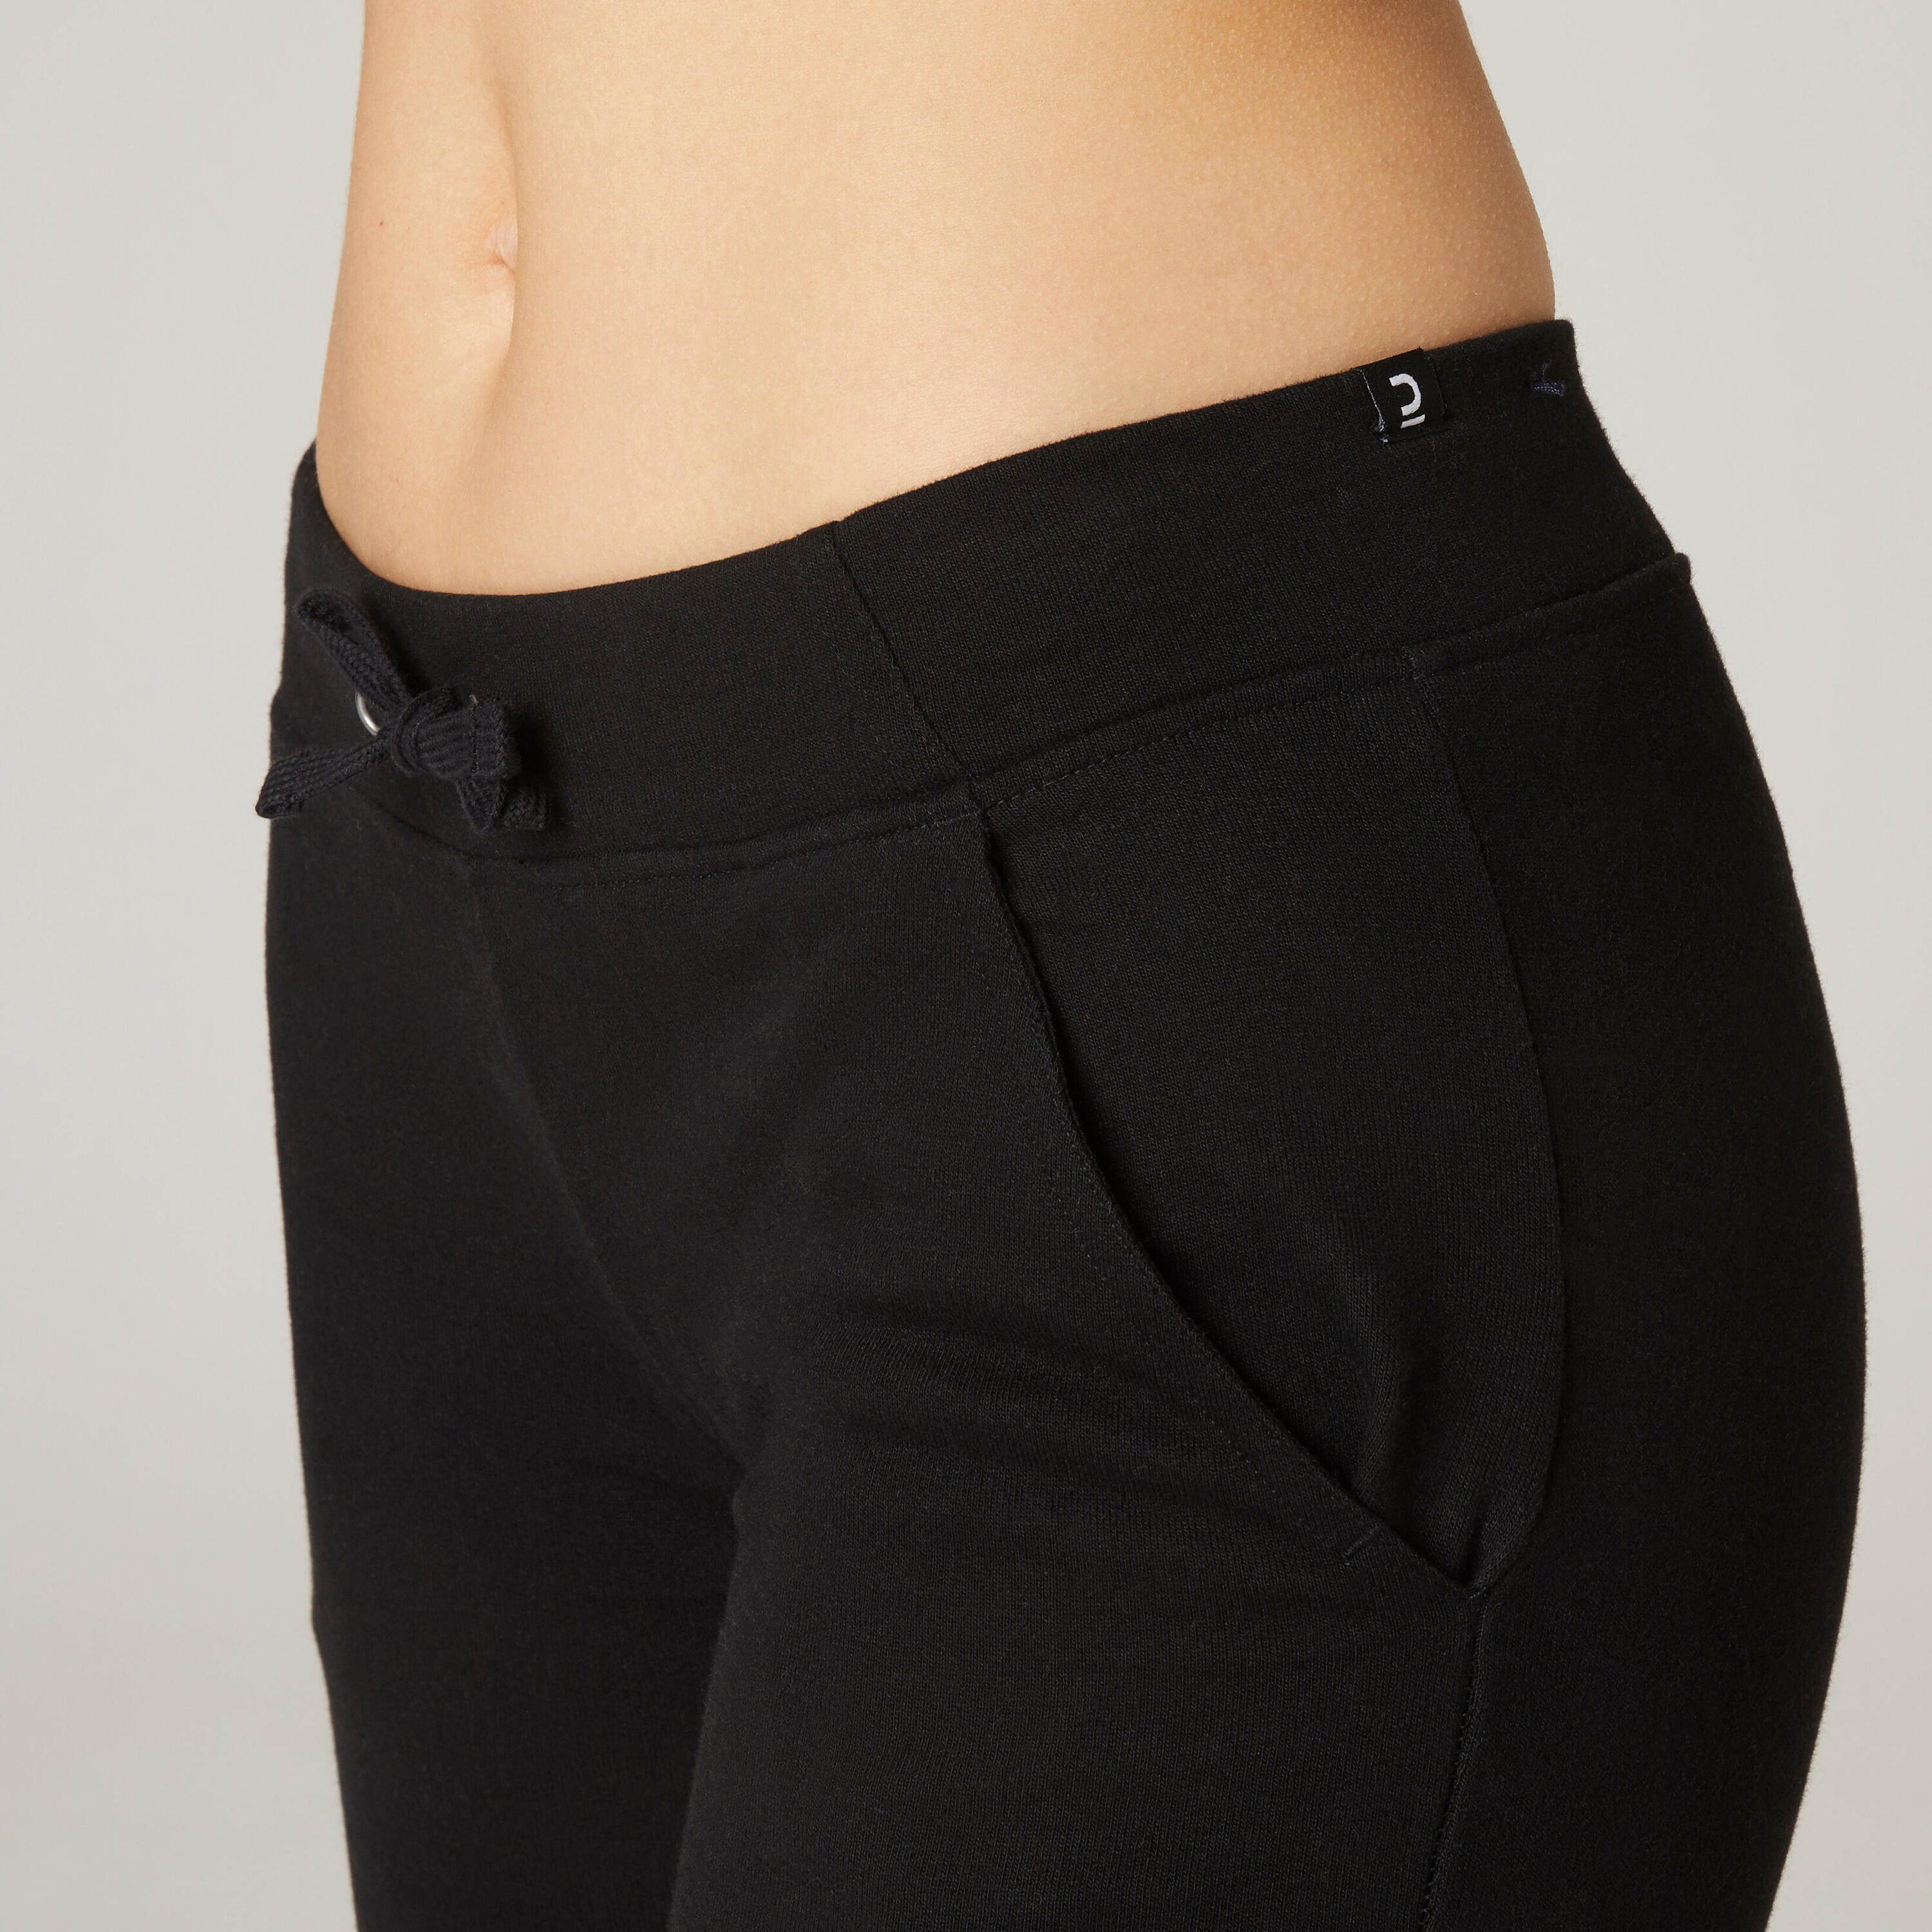 Women's Straight-Cut Cotton Jogging Fitness Bottoms With Pocket 500 - Black 4/5